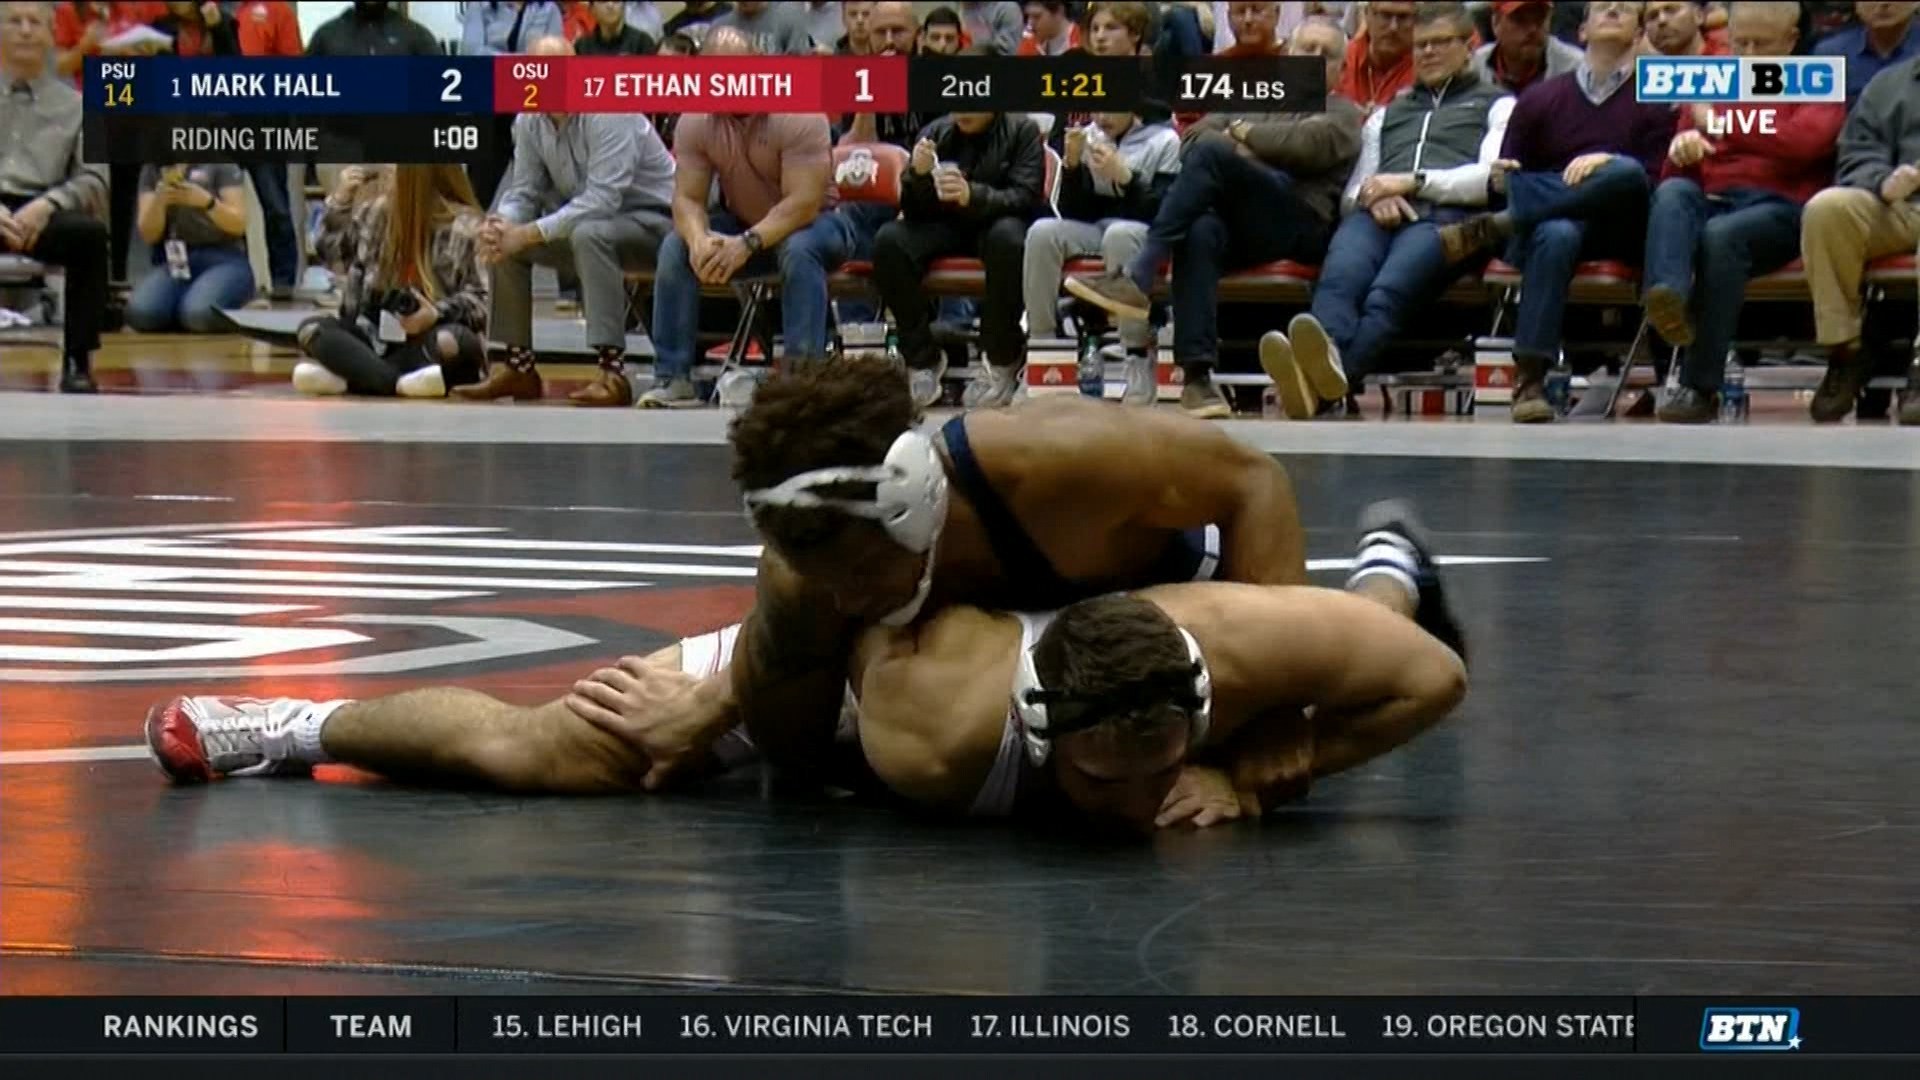 Psu Wrestling Stays Steady In Win Over Ohio State